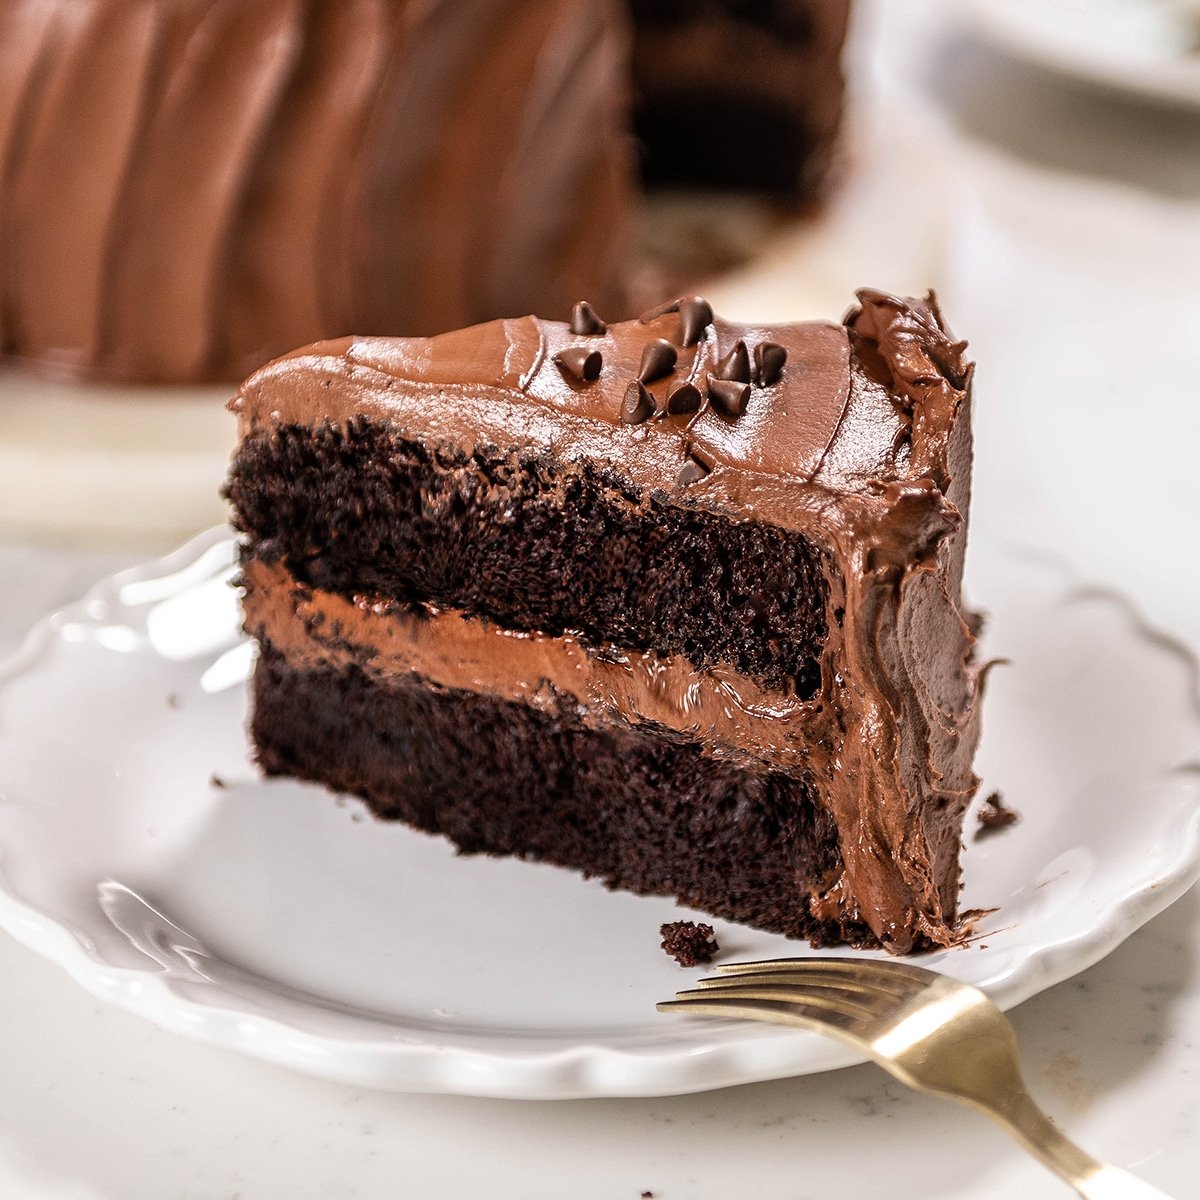 close up of a slice of chocolate cake with chocolate frosting on a. white plate